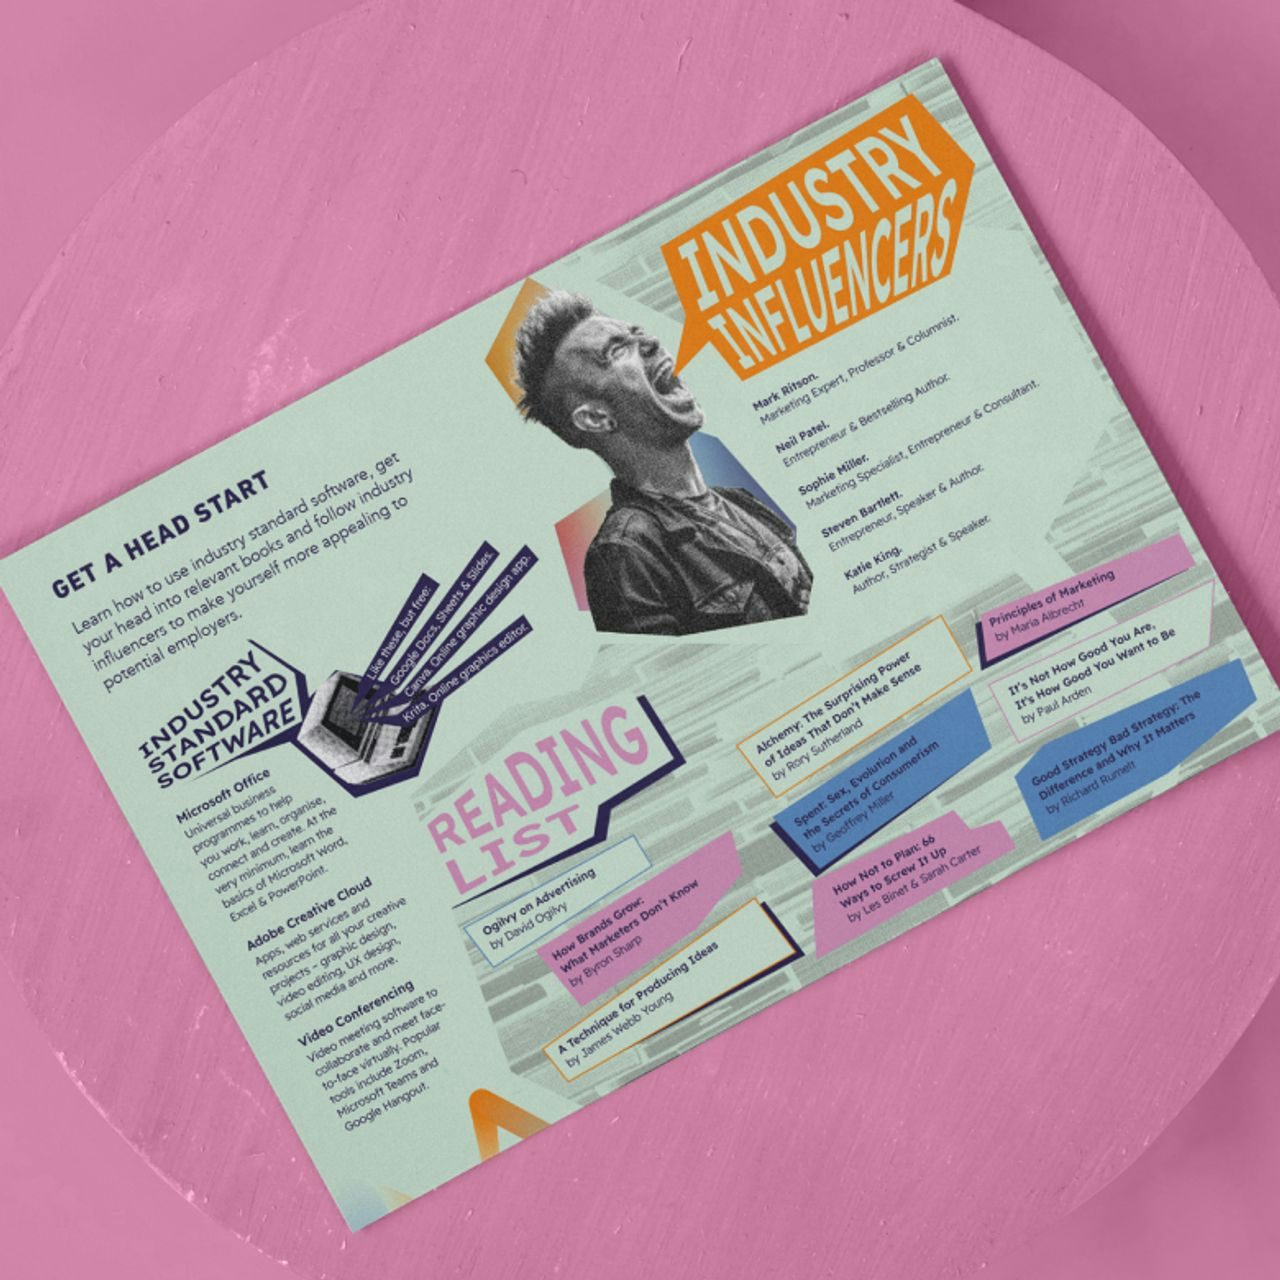 Industry Influencers A4 Leaflet on pink background